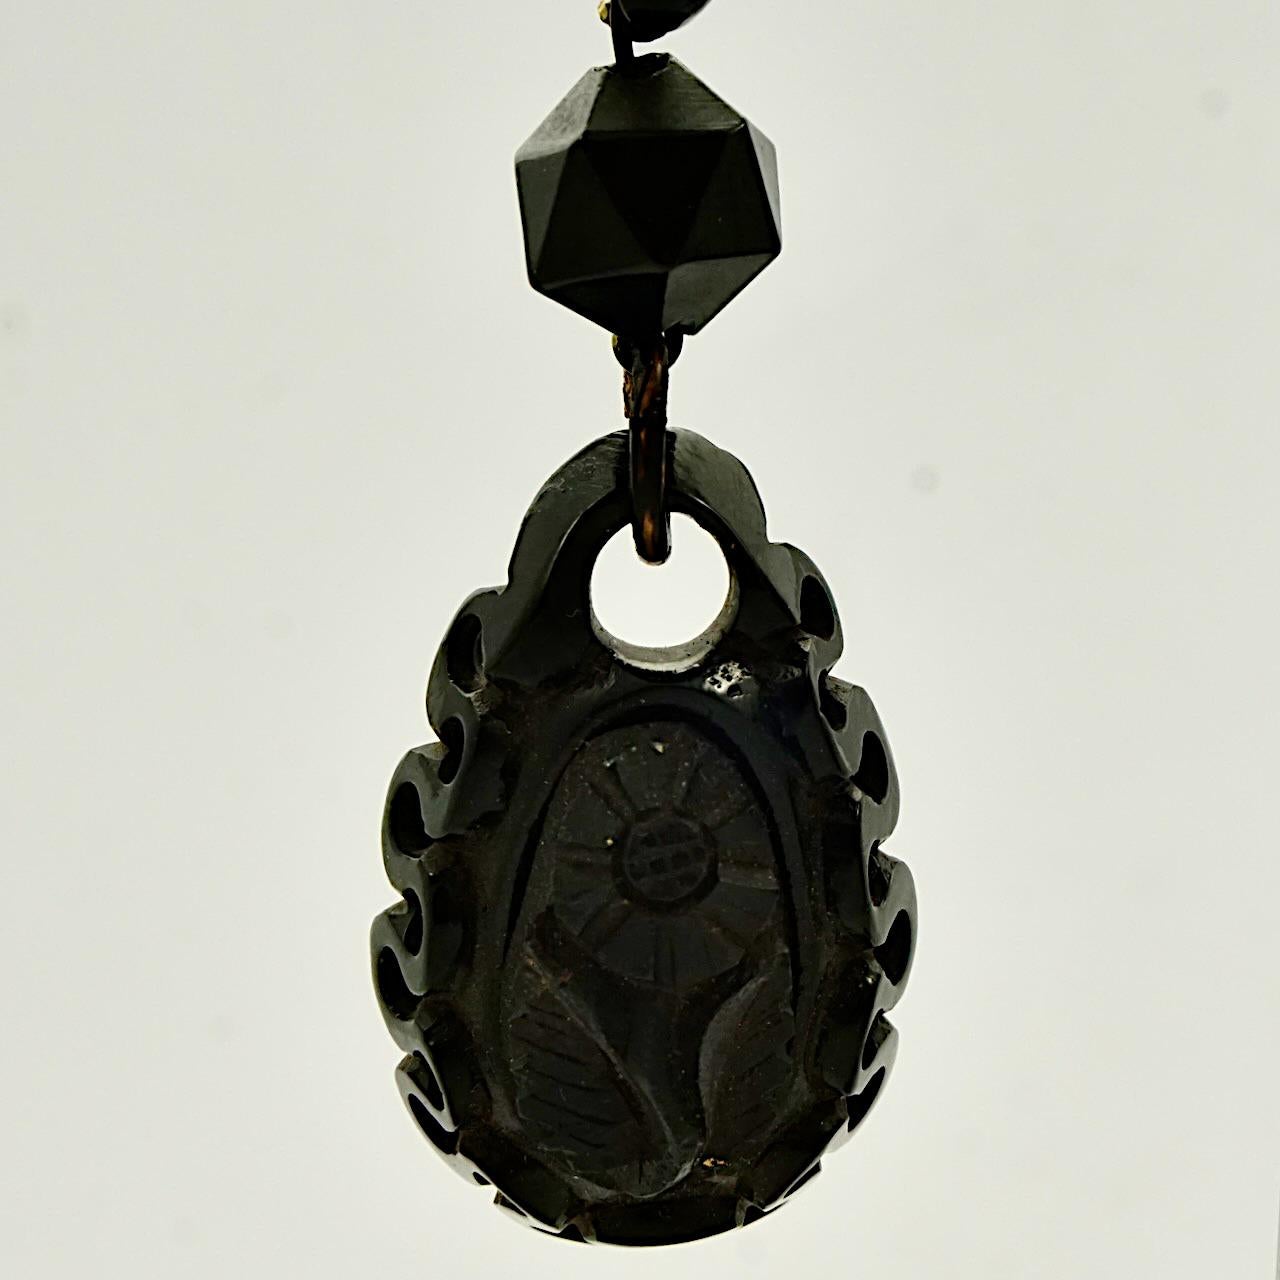 Antique Victorian hand carved Whitby Jet earrings with a lovely flower design, and gold tone hooks. Measuring, not including the hooks, length 4.5 cm / 1.77 inches by width 2 cm / .78 inch. The earrings are in very good condition. There is wear to